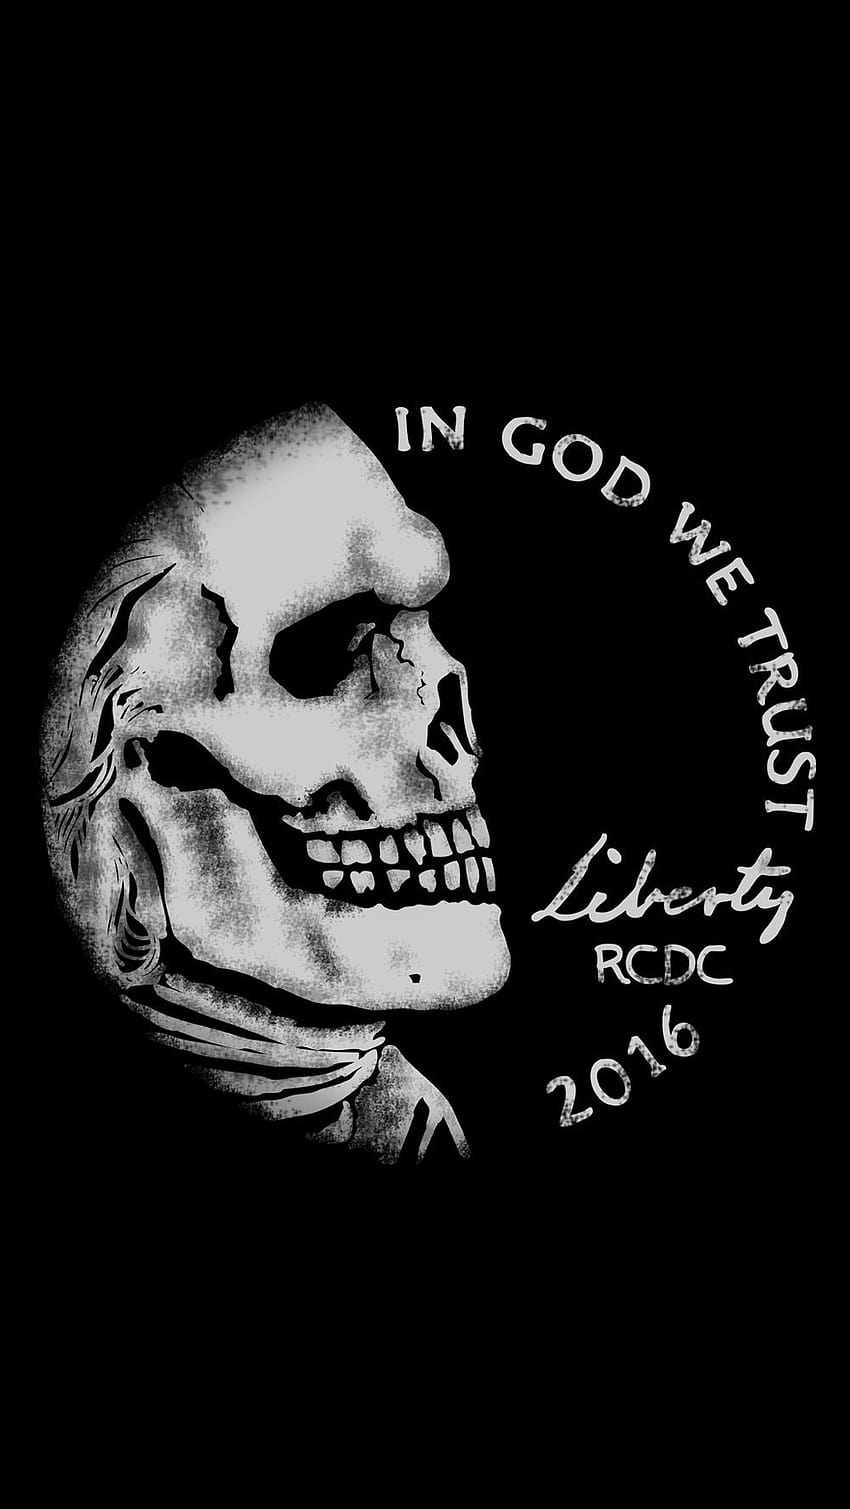 Pin on RCDC phone, in god we trust HD phone wallpaper